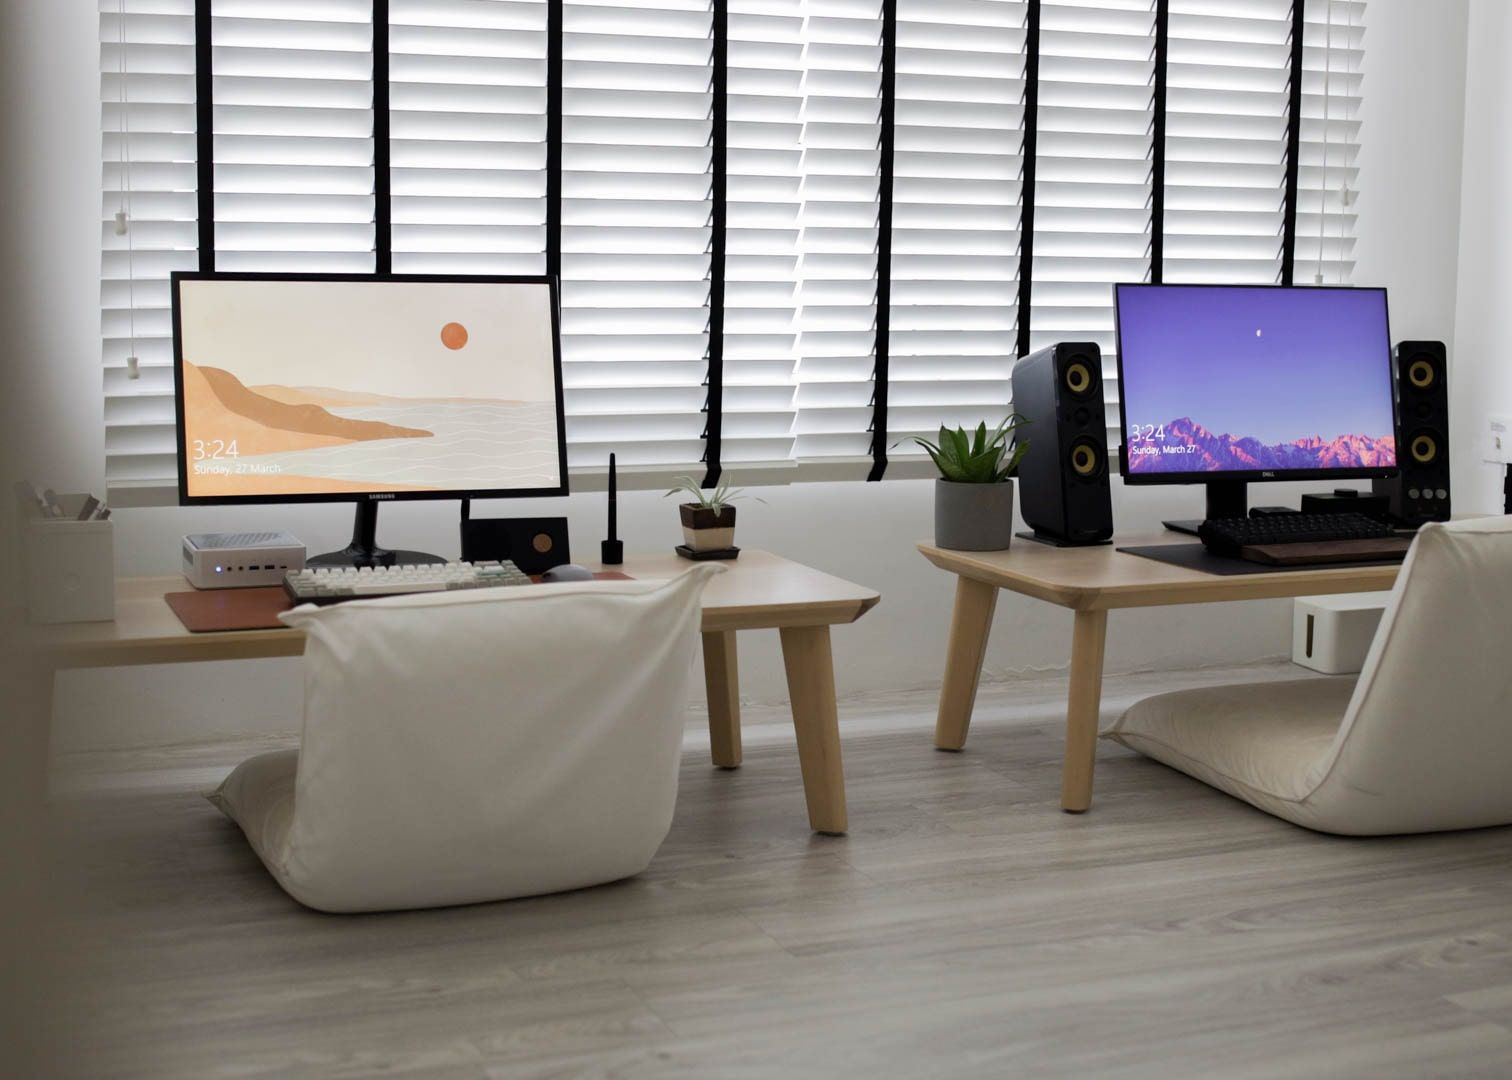 A shared home office setup featuring a floor desk and floor chair